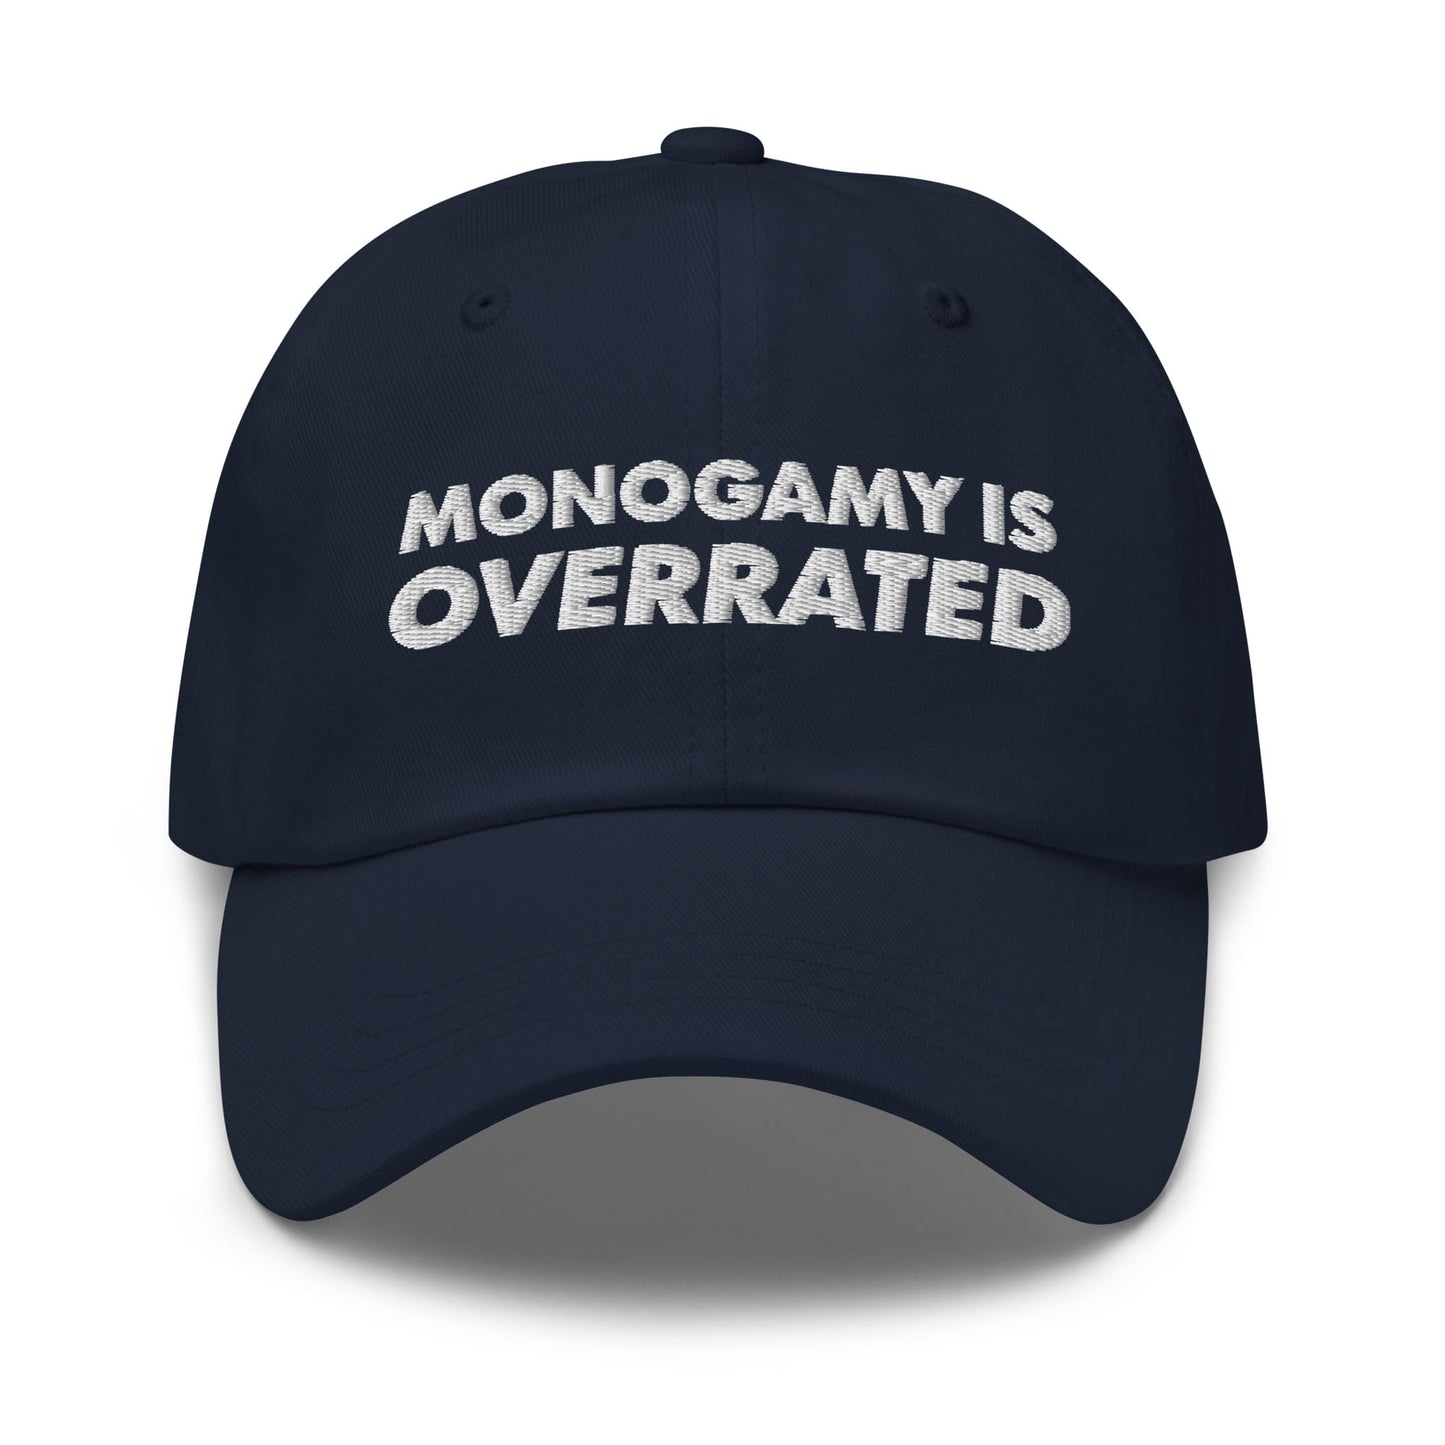 polyamory hat, statement polyamorous pride embroidered cap, blue